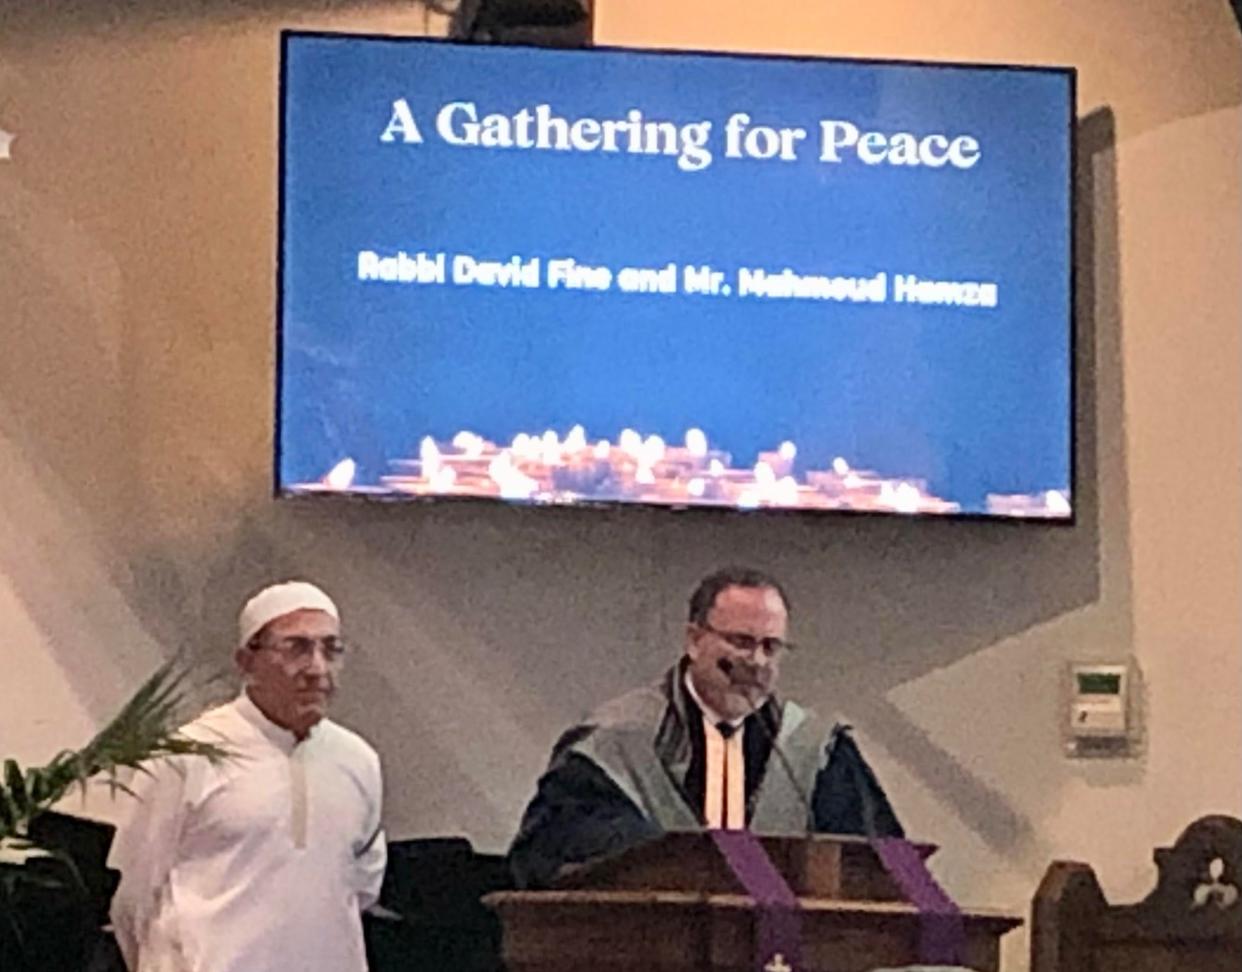 Imam Mahmoud Hamza and Rabbi David Fine, two longtime friends, speak at Emmanuel Church in Ridgewood on March 24, 2024 to call for unity amid chaos in the Middle East.